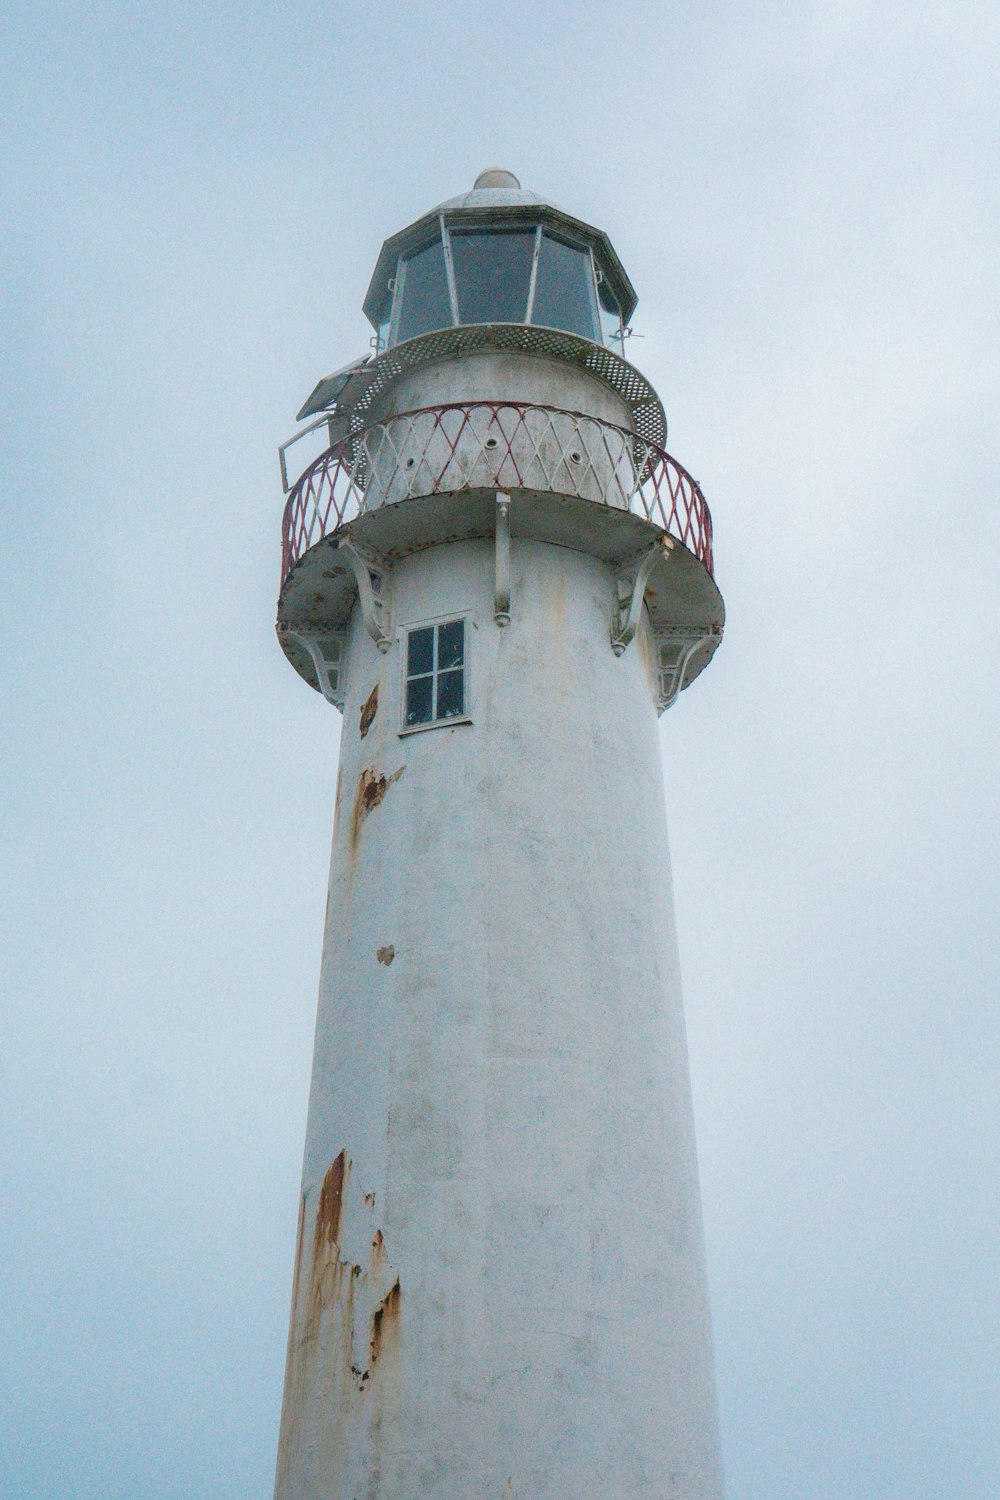 a white and red lighthouse